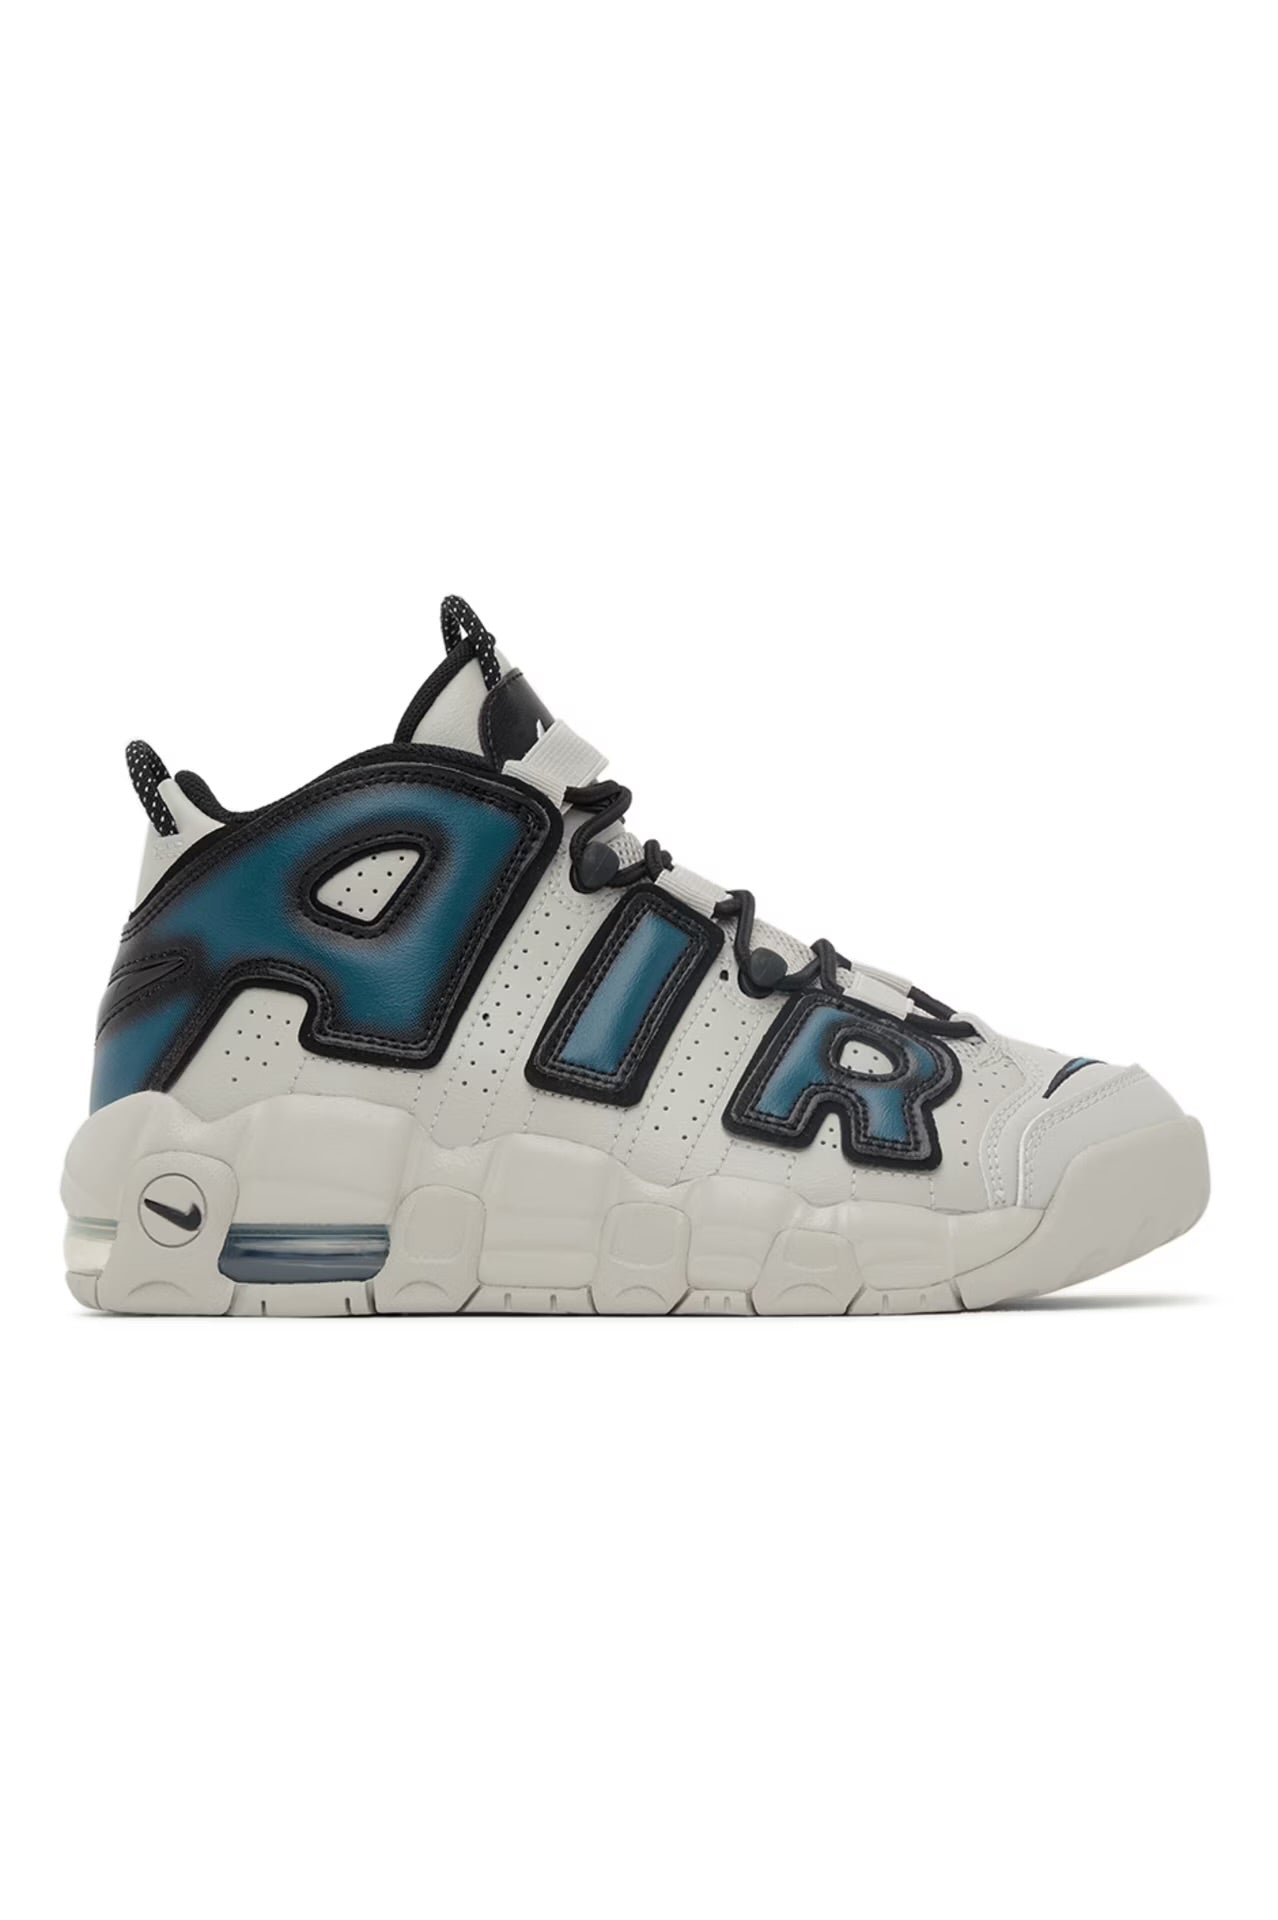 NIKE AIR MORE UPTEMPO LT IRON ORE/INDUSTRIAL BLUE-IRON